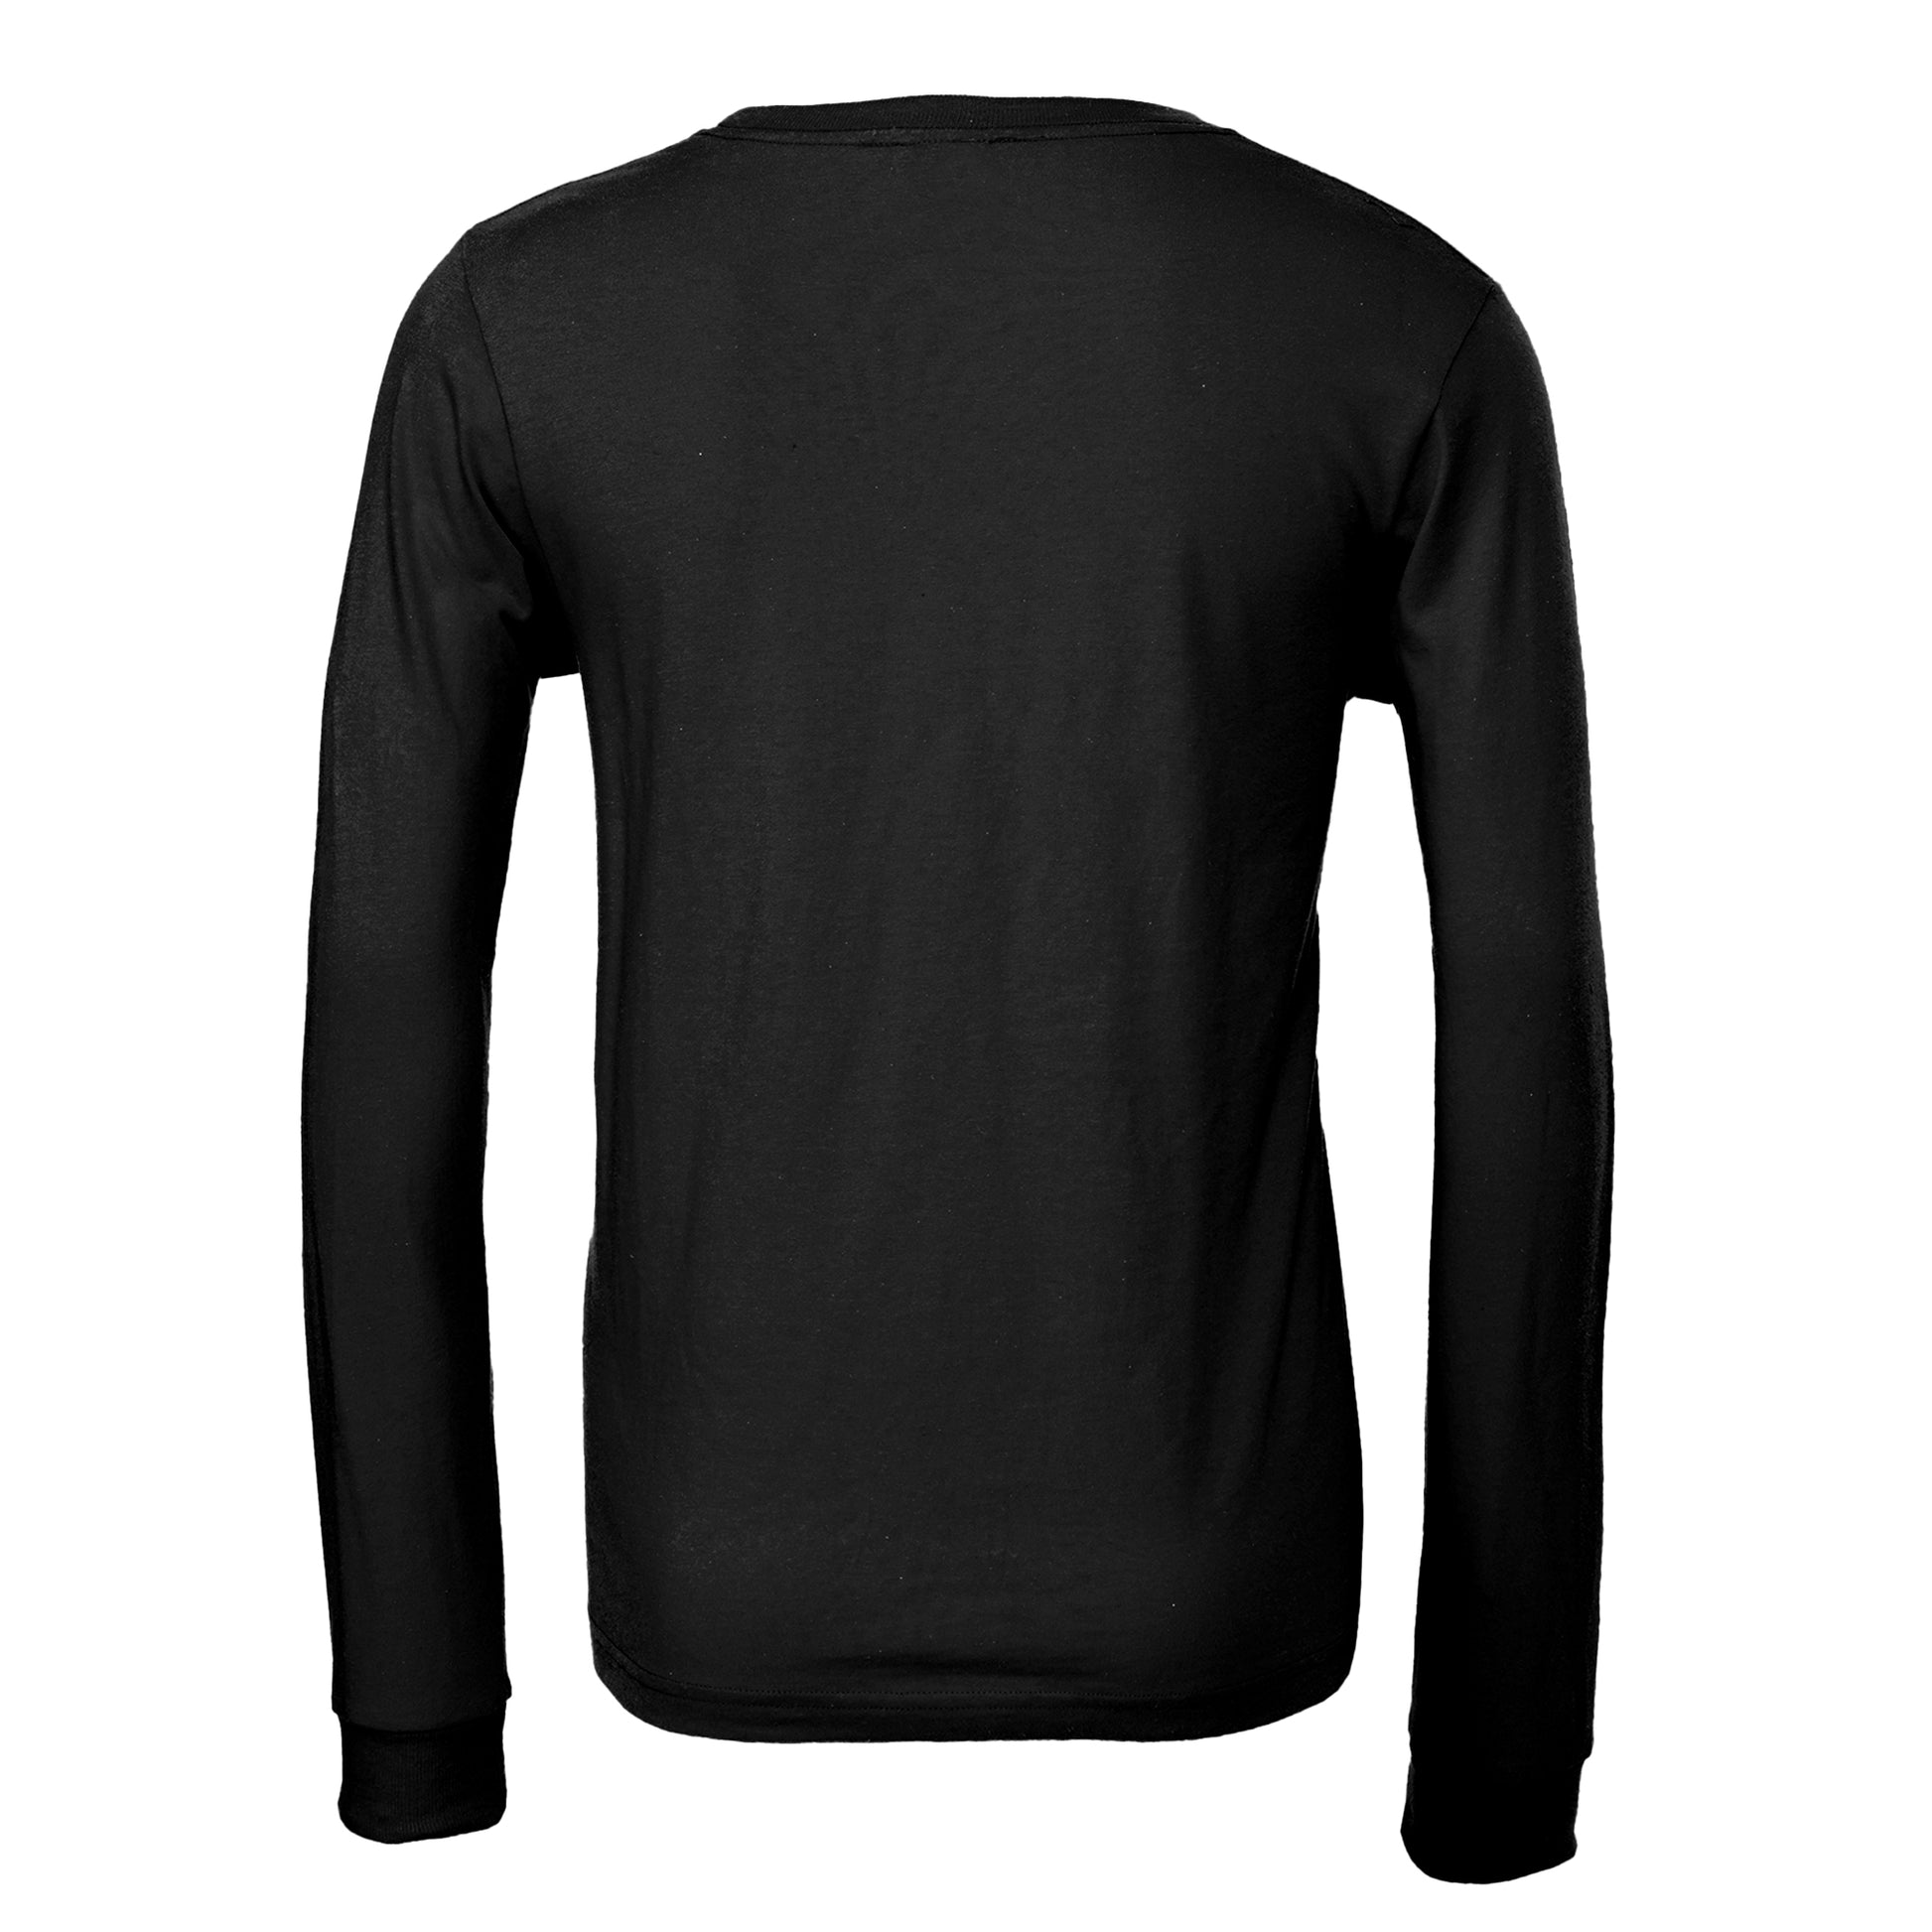 Dalix Ghost Embroidered Long Sleeve Tee Lightweight Soft Cotton Shirt Mens in Black 2XL XX-Large